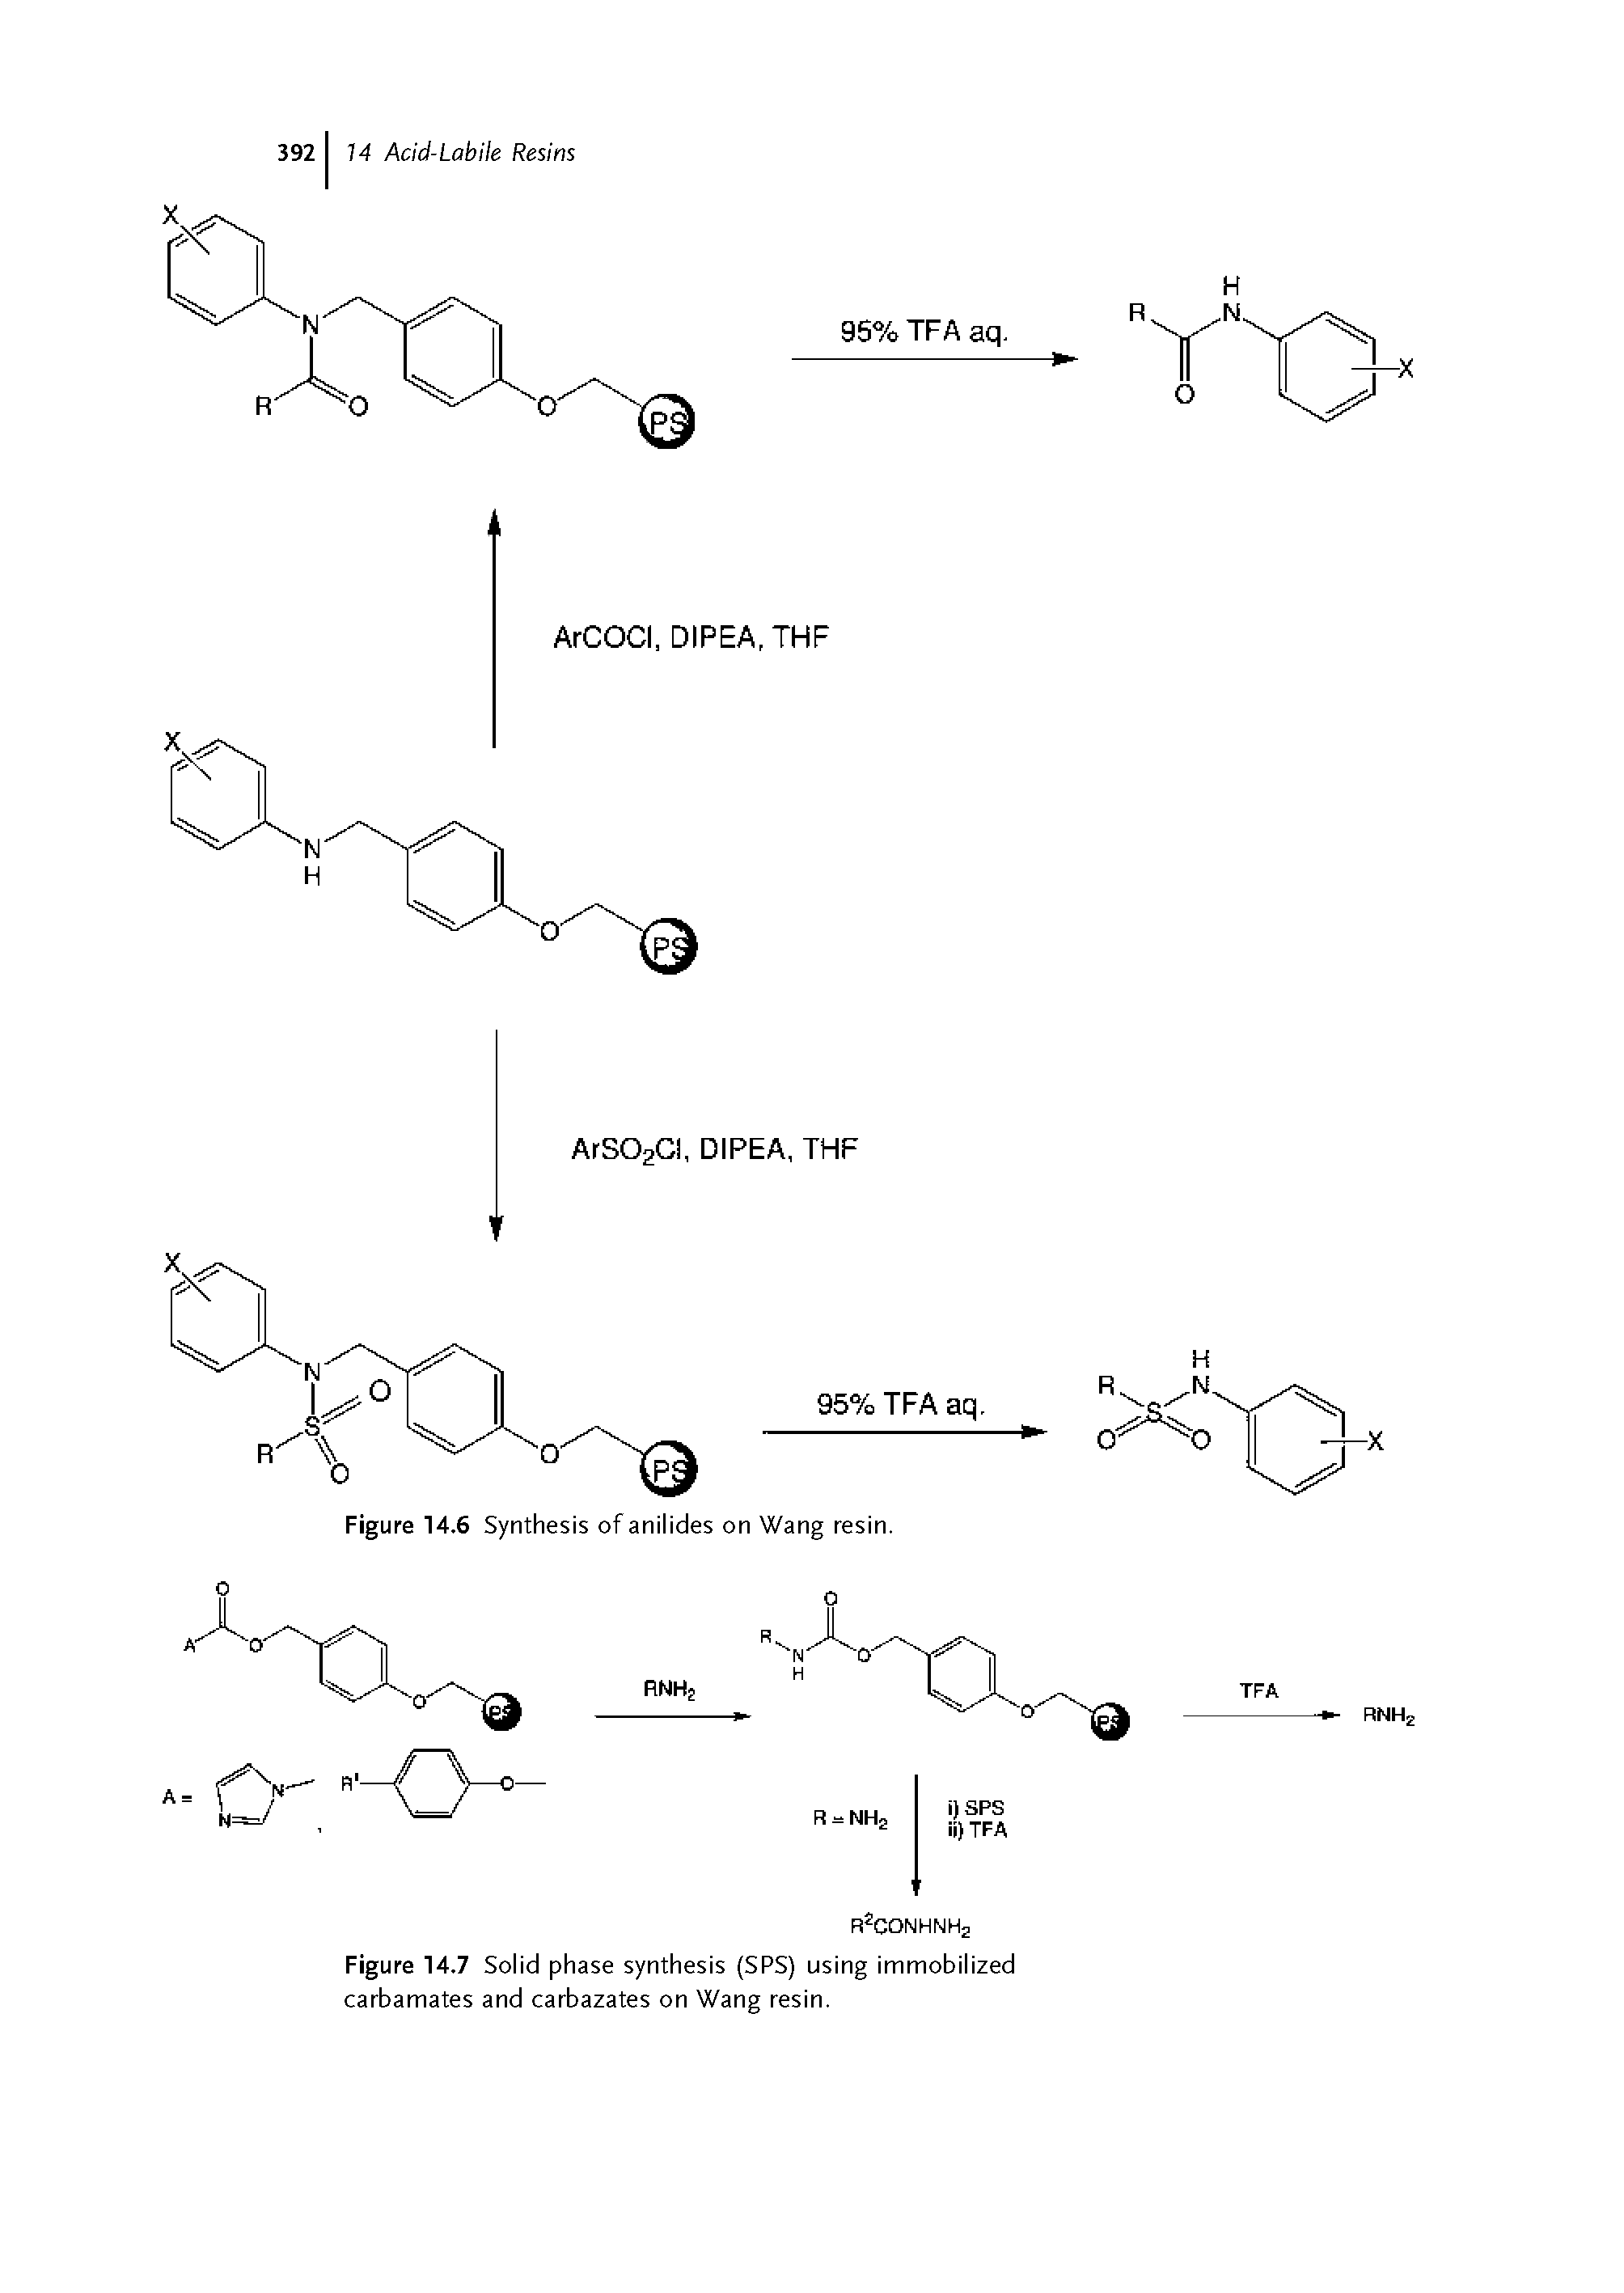 Figure 14.7 Solid phase synthesis (SPS) using immobilized carbamates and carbazates on Wang resin.